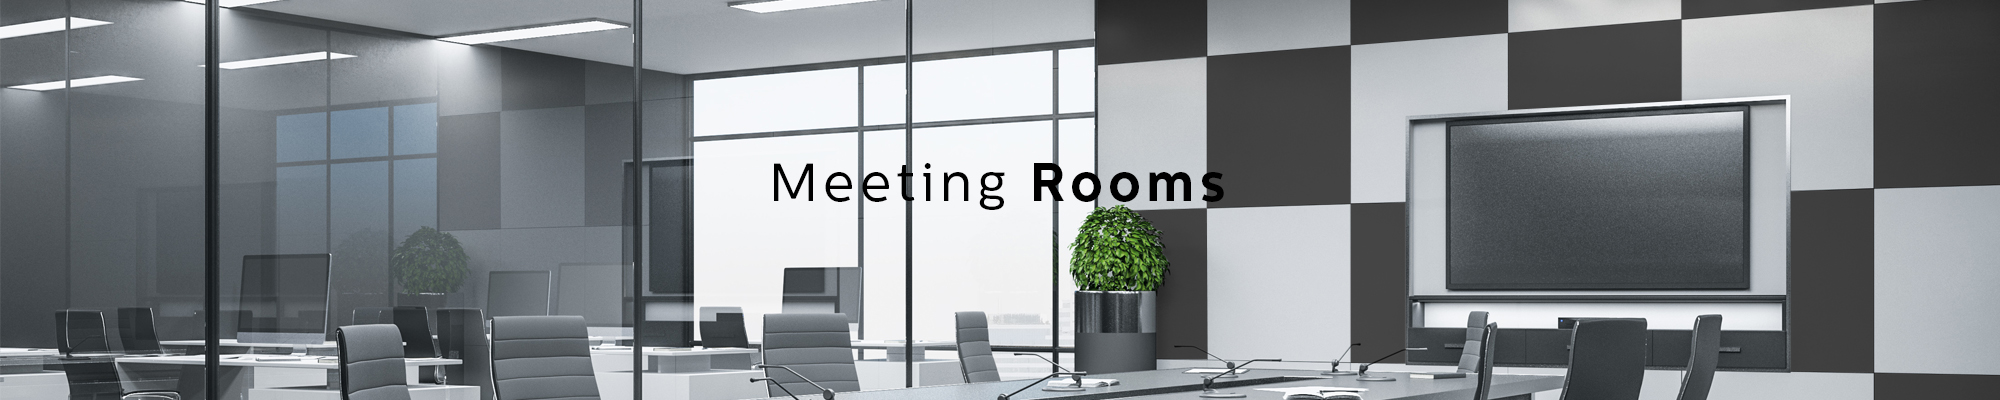 Meeting room sound absorbing panels